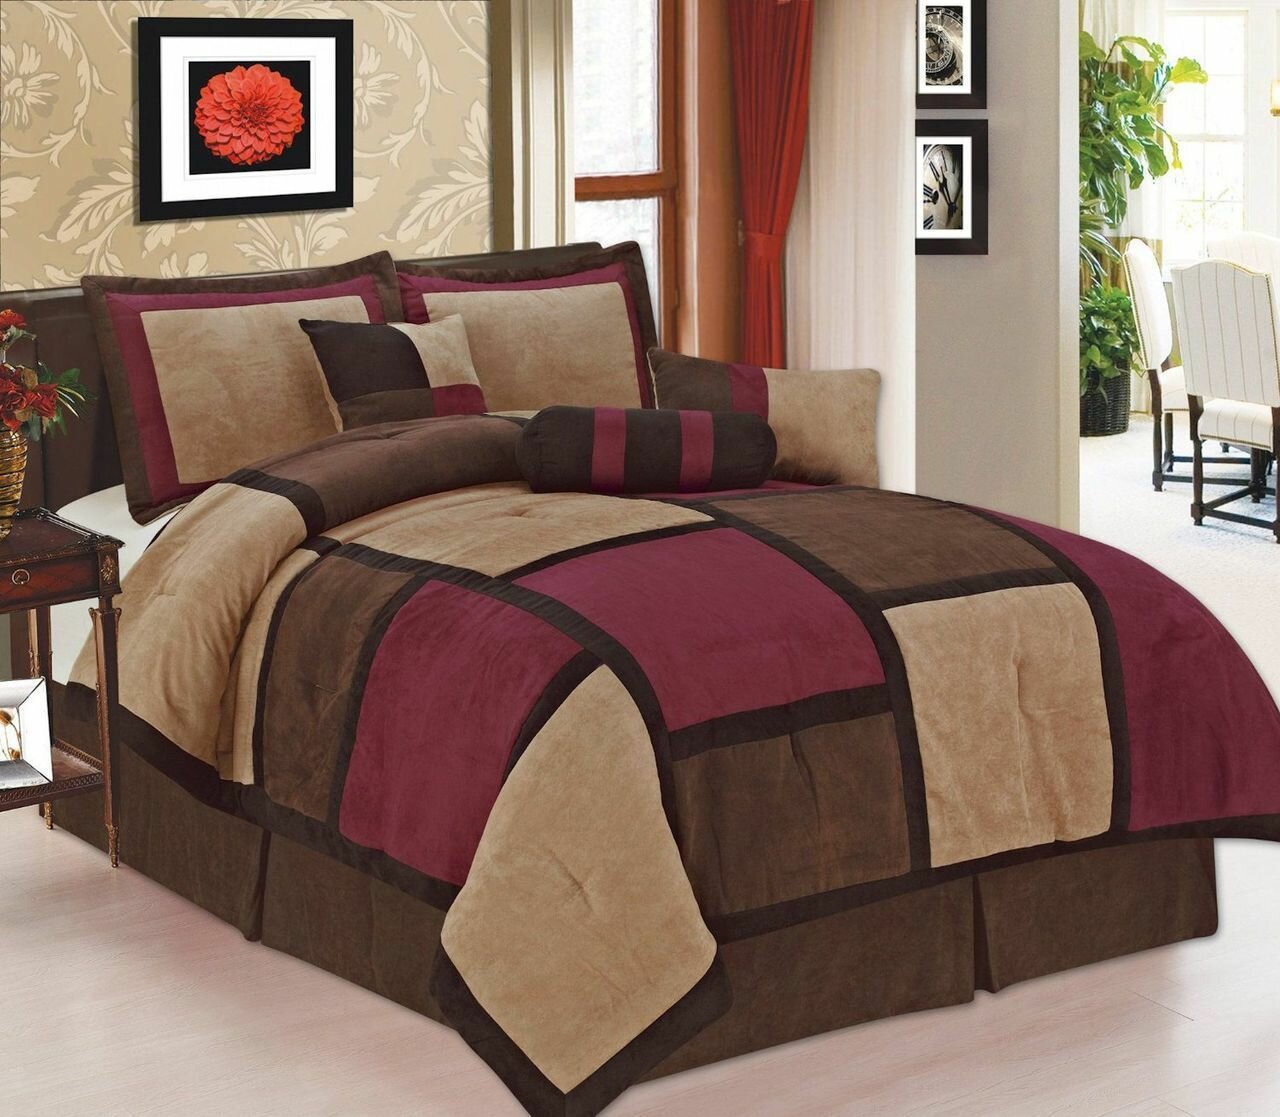 Rashi 10 or 8 Piece Color Block Bed In a Bag Bedding and Comforter Set burgundy  queen, queen - Smith's Food and Drug